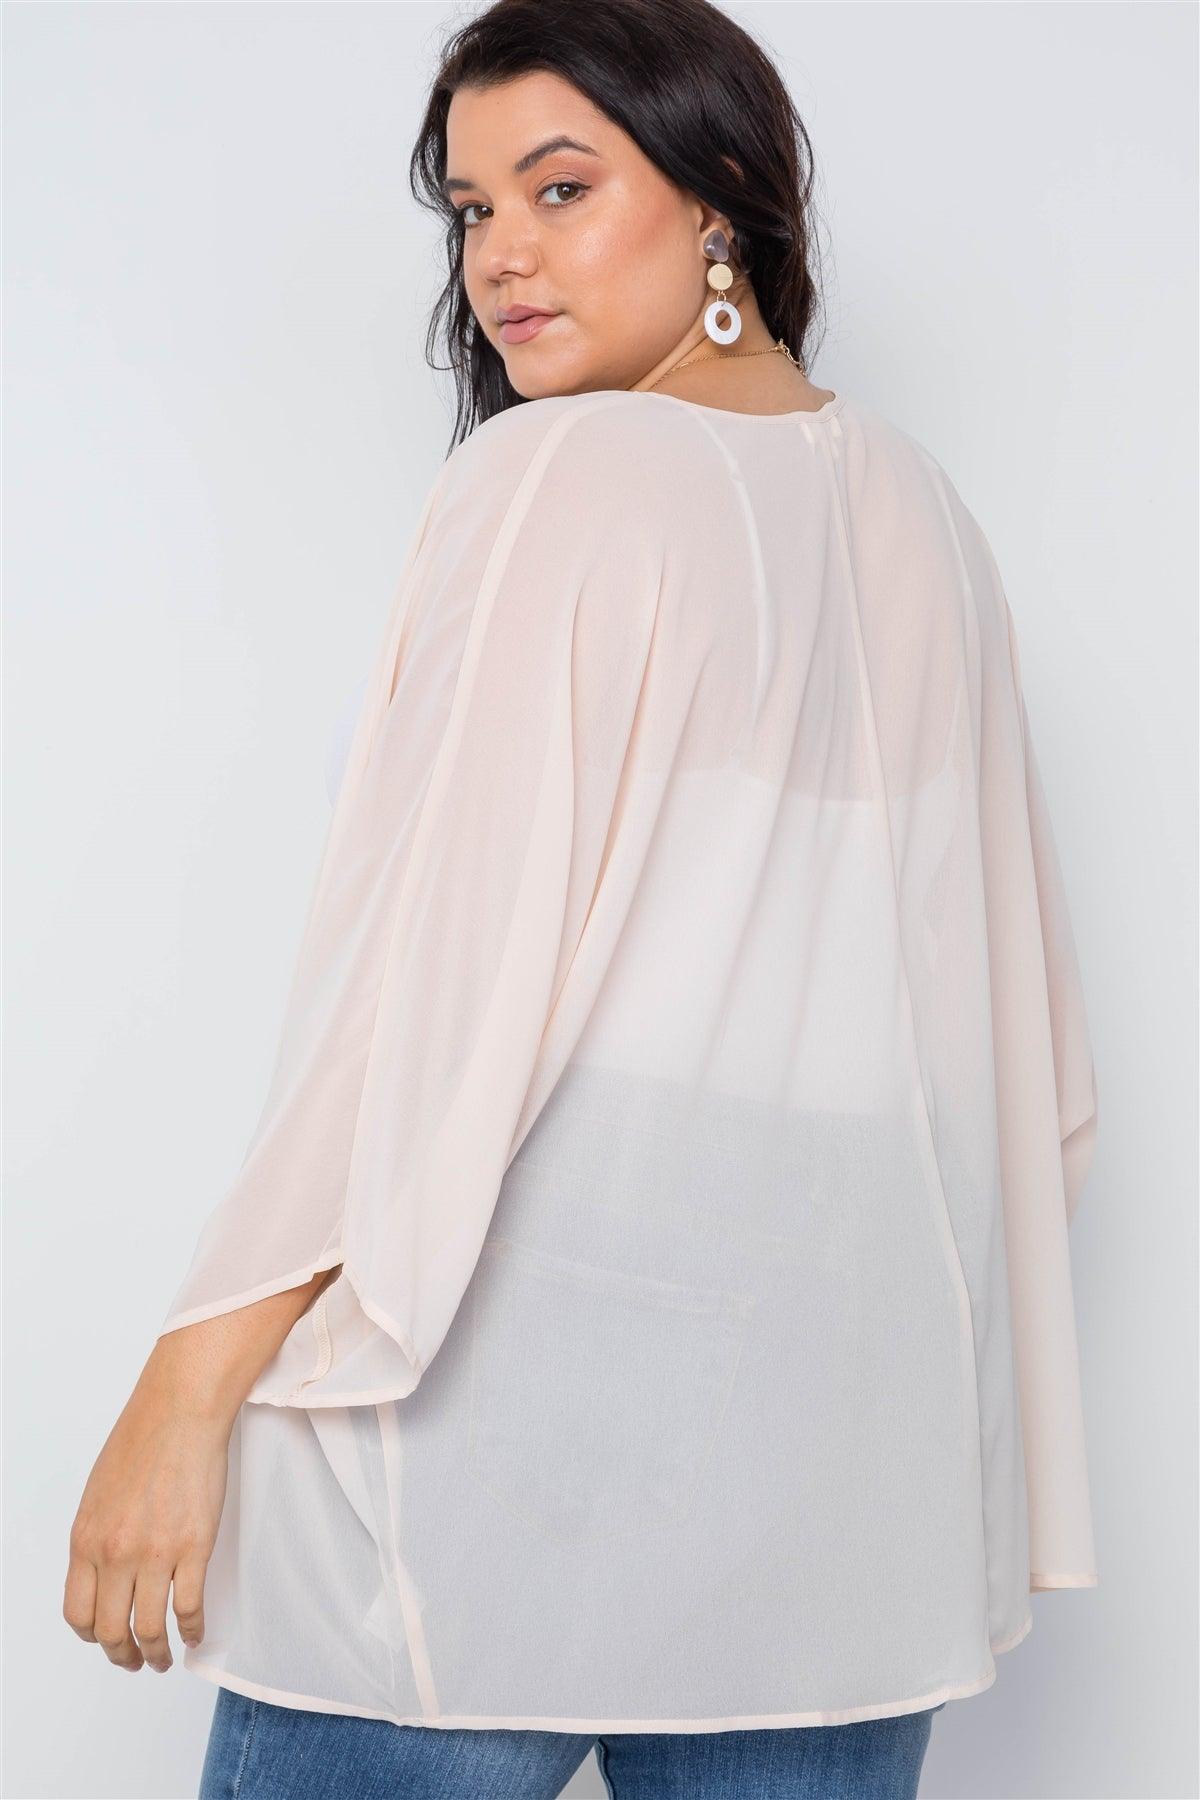 Plus Size Natural Sheer Batwing Sleeves Cover Up /2-3